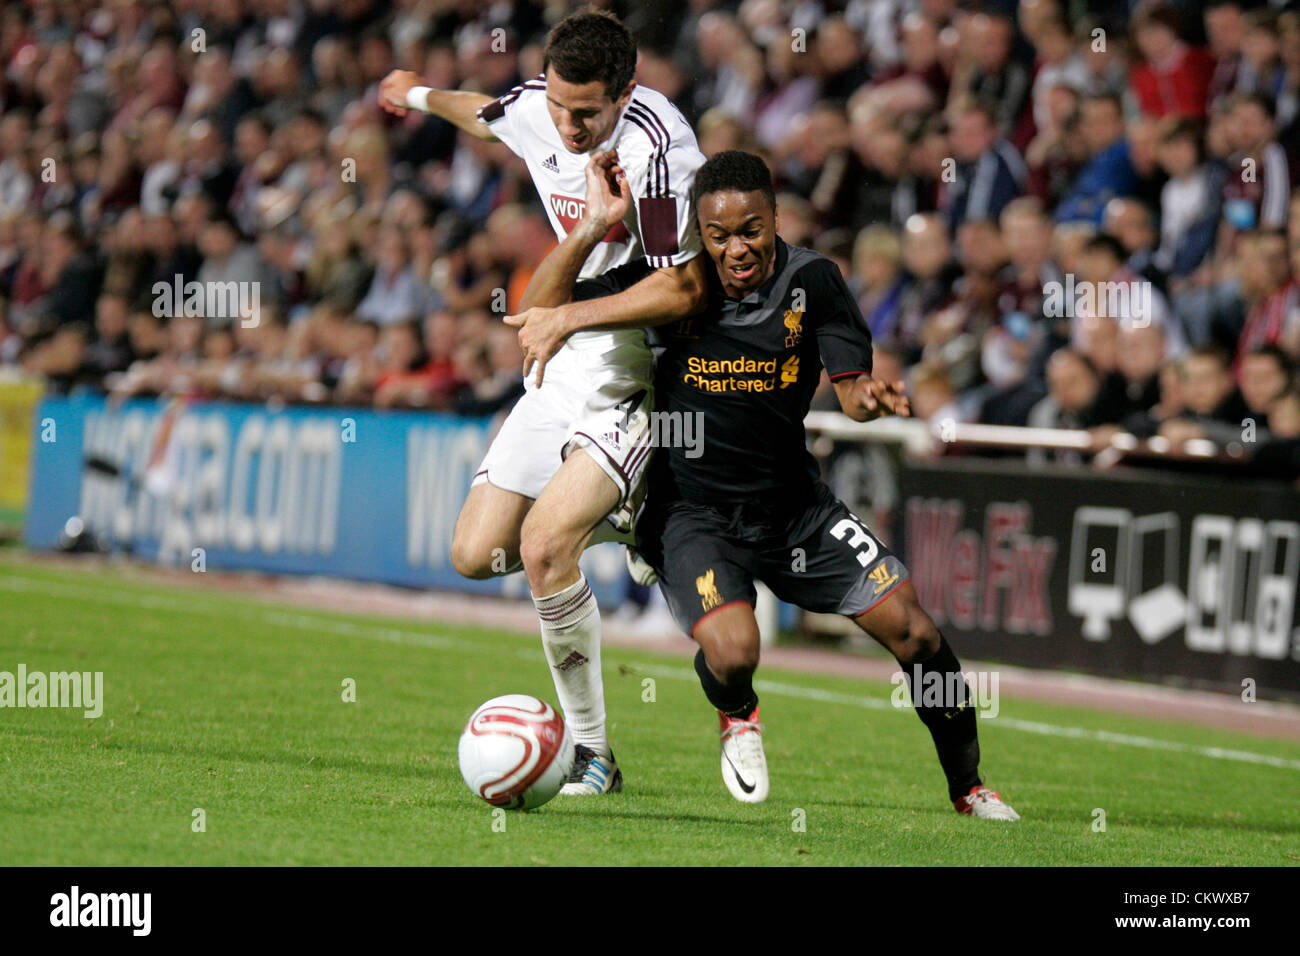 23.08.2012 Edinburgh, Scotland.  4 Ryan McGowan and 31. Raheem Sterling in action during the Europa League Qualifying 1st leg tie between Hearts and Liverpool from the Tynecastle Stadium. Hearts lost 0-1 to an own goal in the first leg. Stock Photo